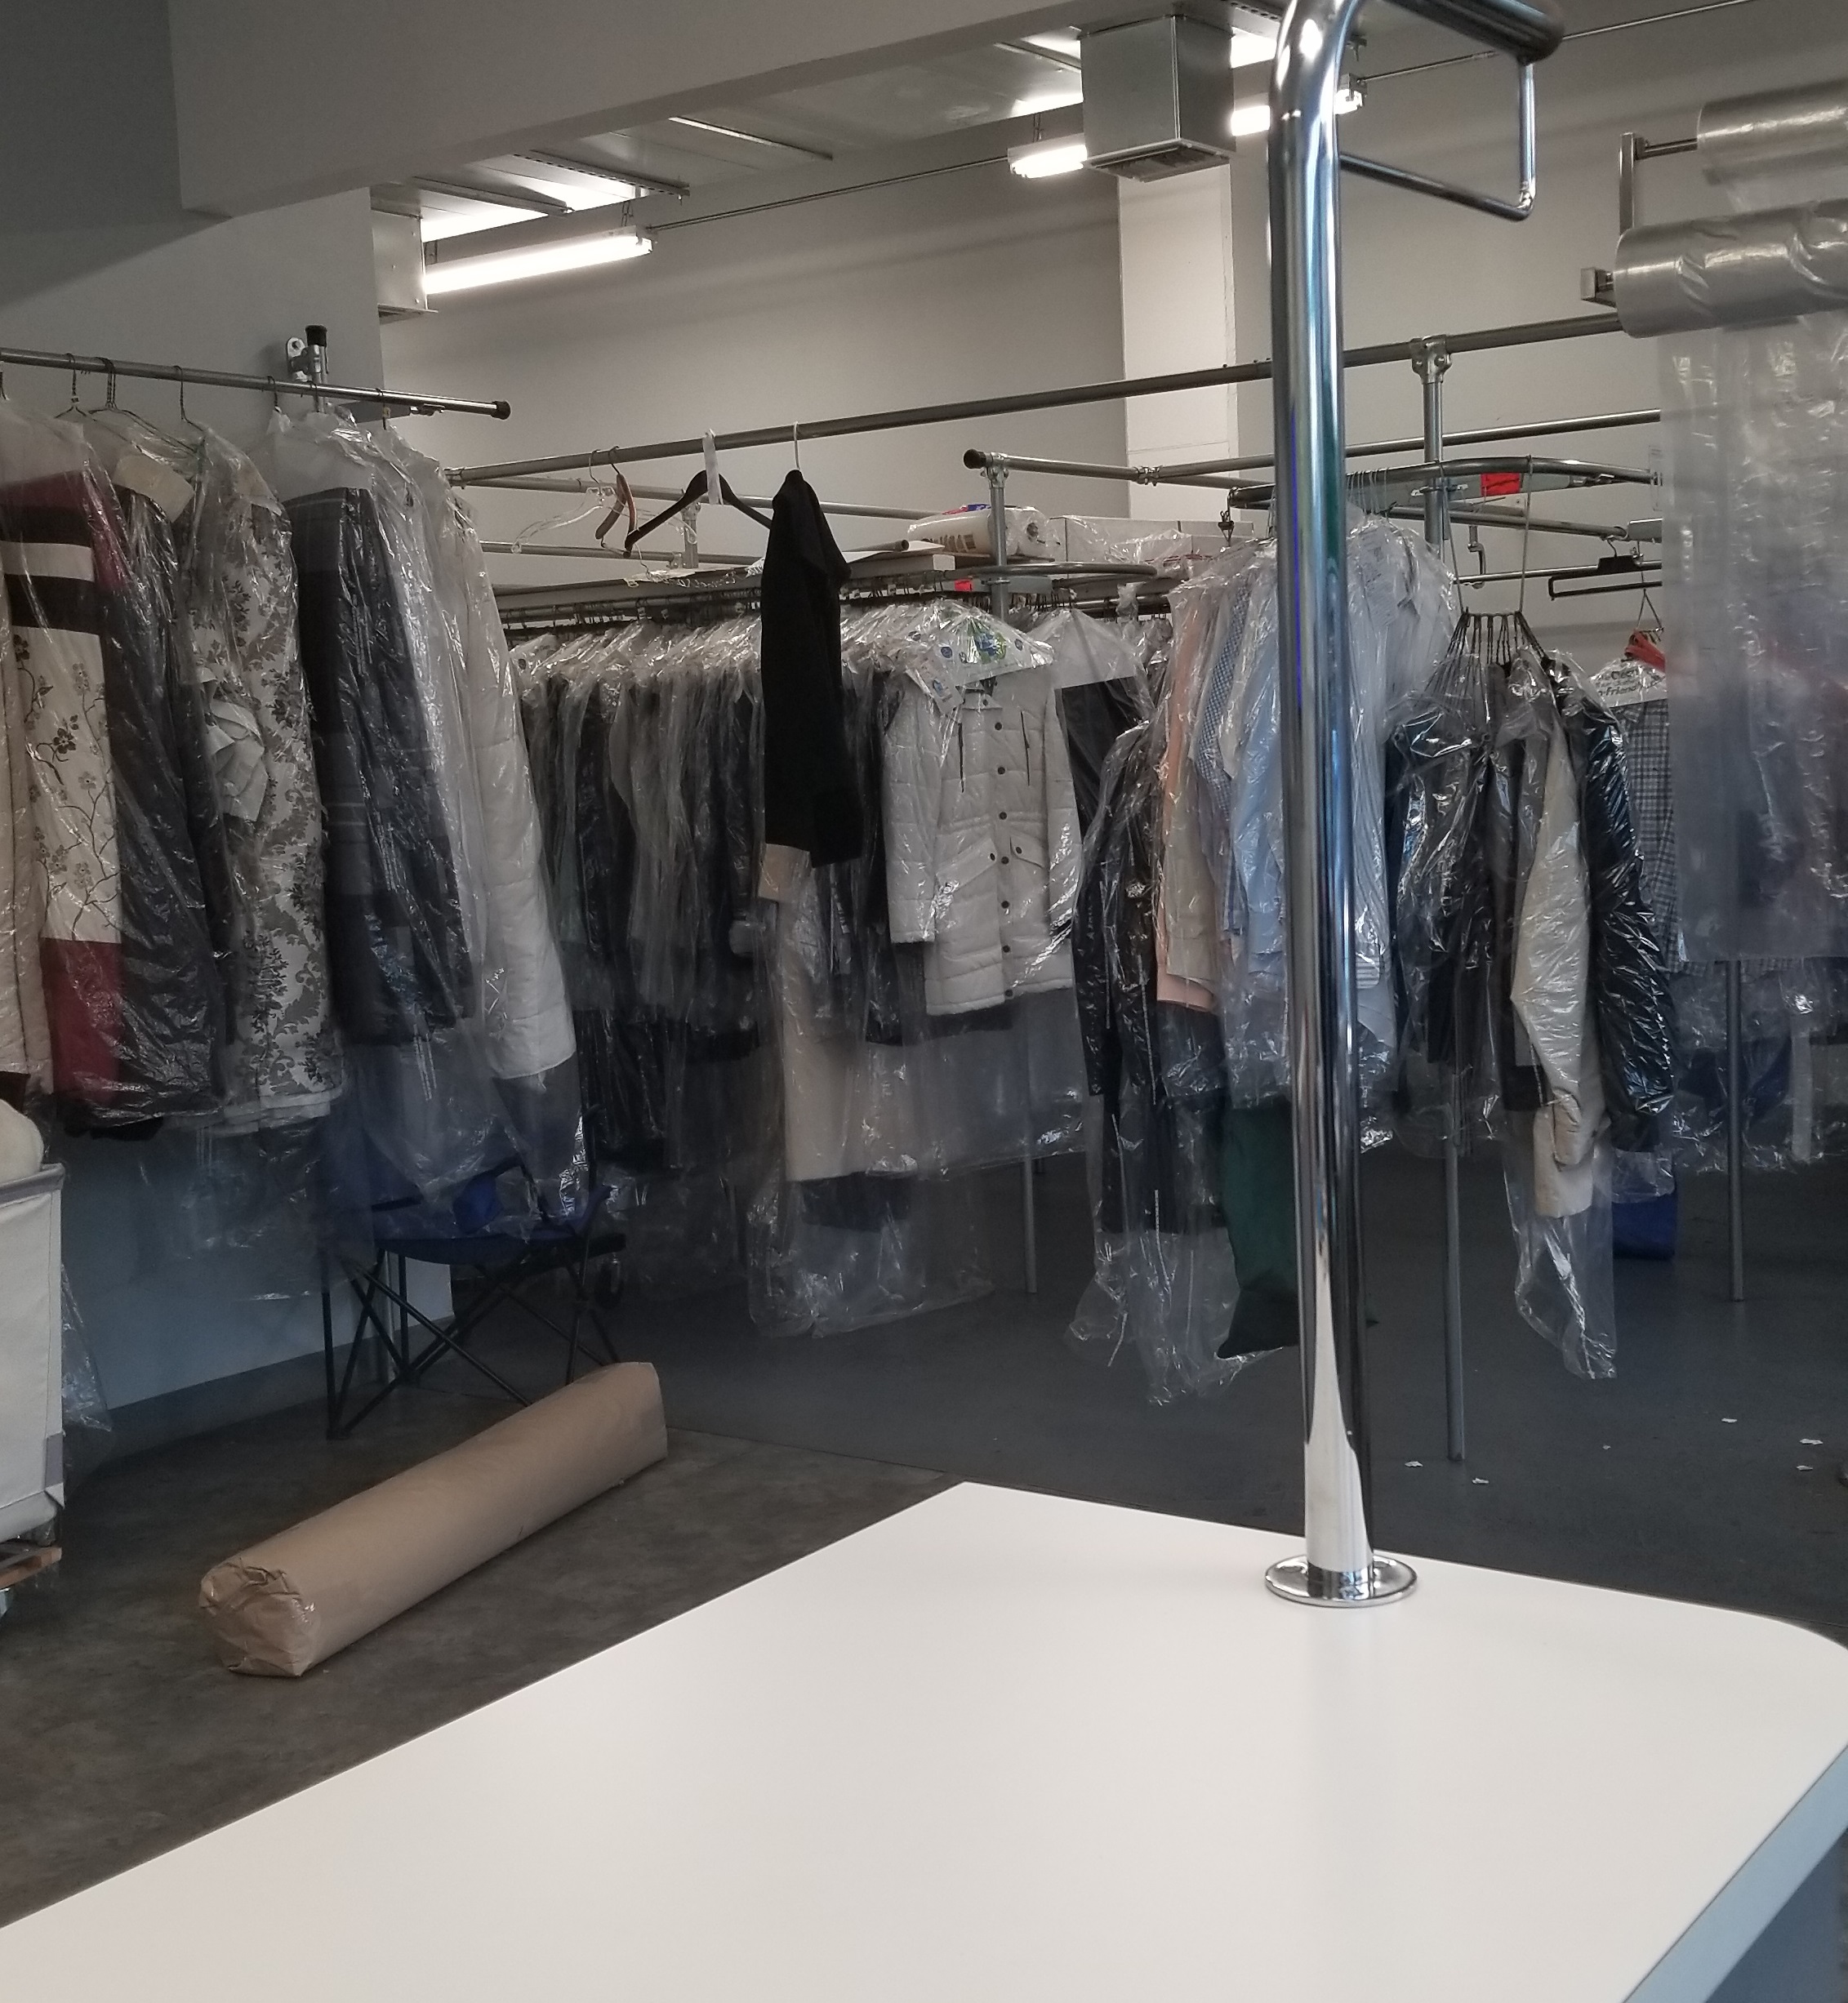 Dry Cleaning Business for sale in NY